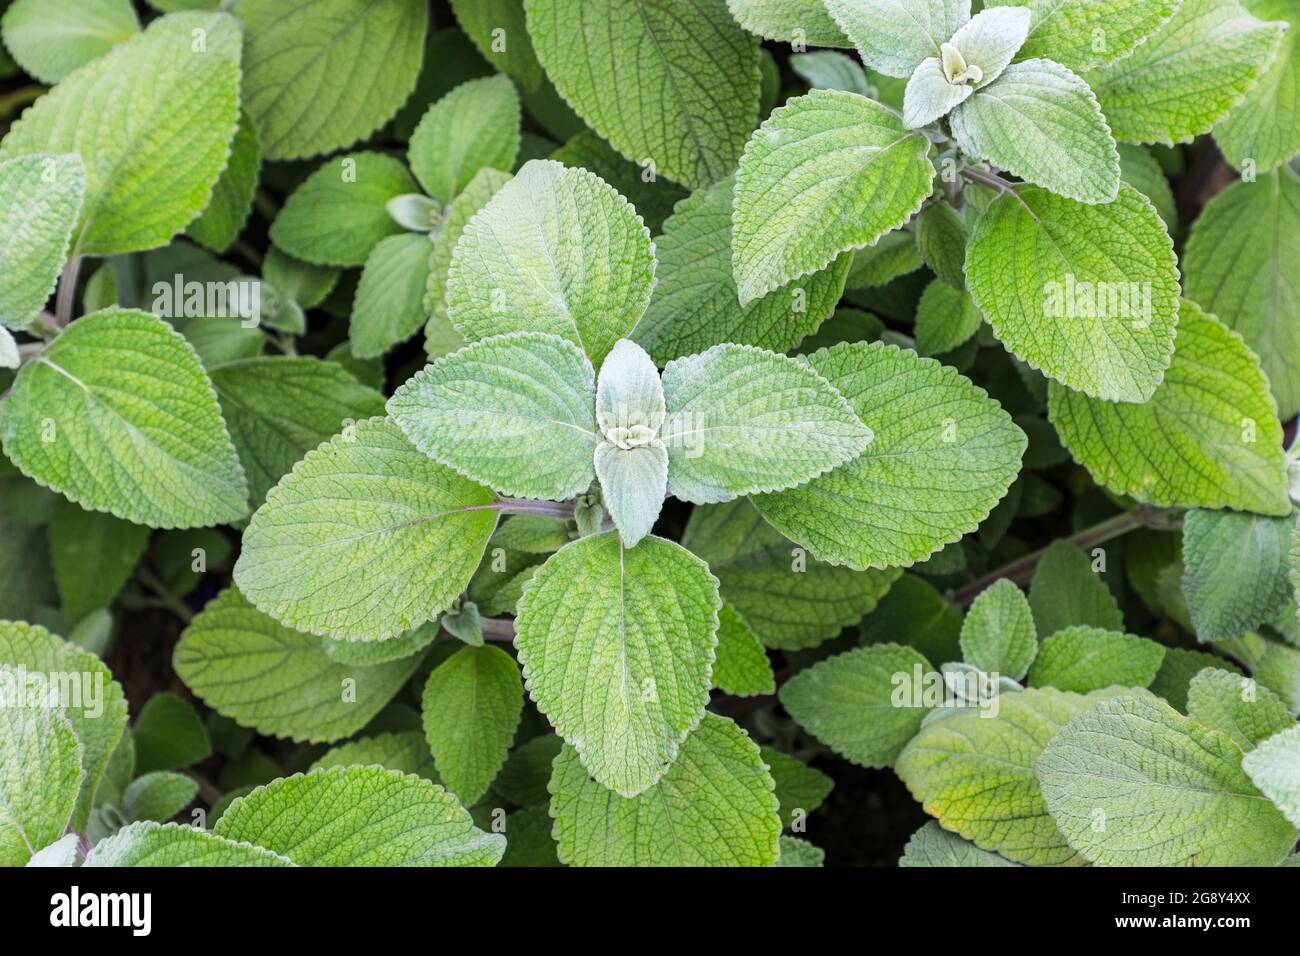 The furry leaves of Apple Mint (Mentha suaveolens), also know as pineapple mint, woolly mint or round-leafed mint, England, UK Stock Photo